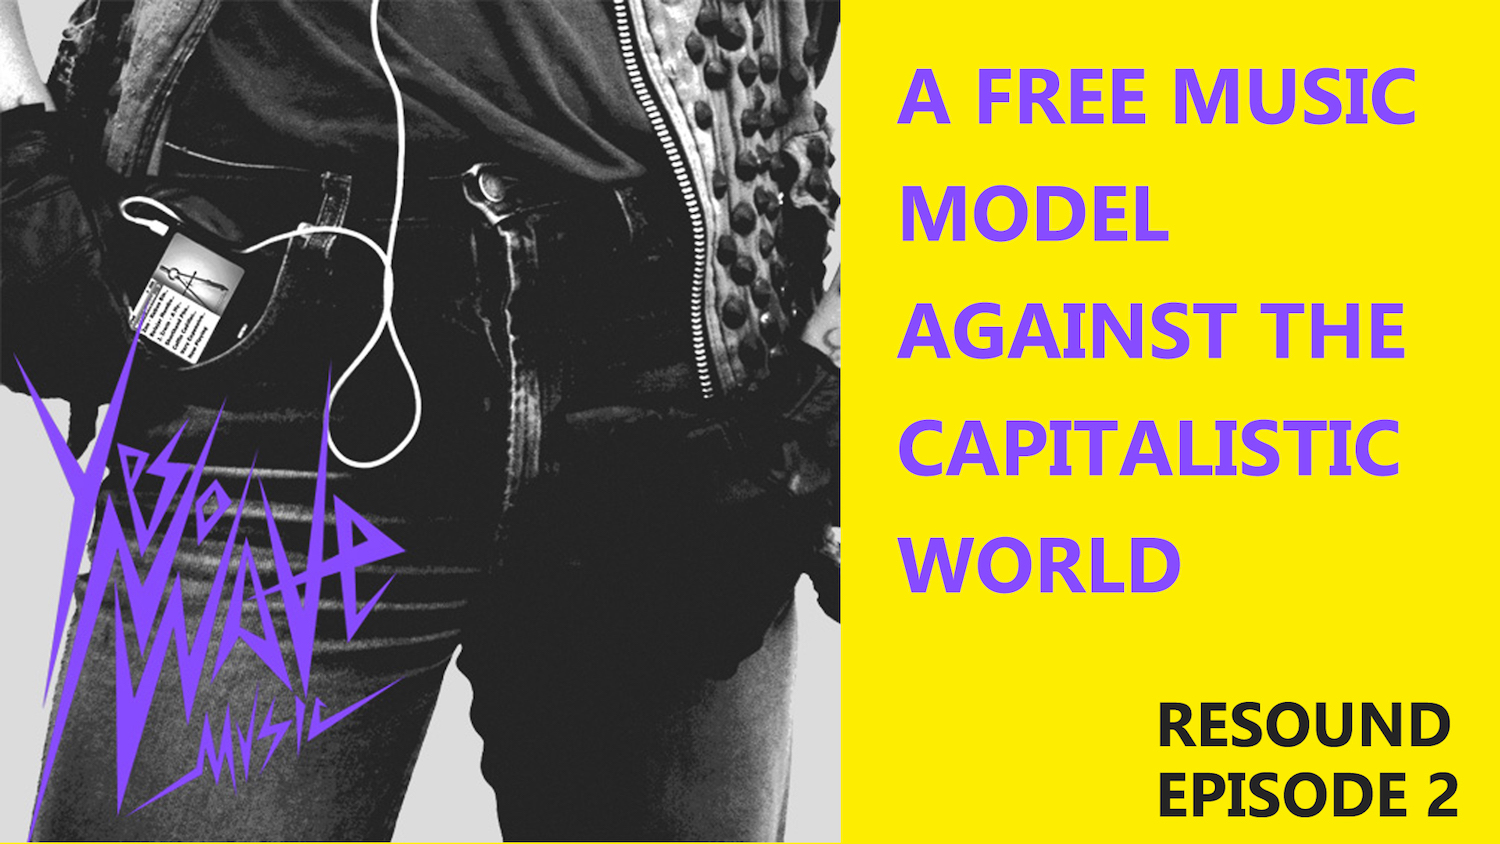 RESOUND EP2: YES NO WAVE – A FREE MUSIC MODEL AGAINST THE CAPITALISTIC WORLD